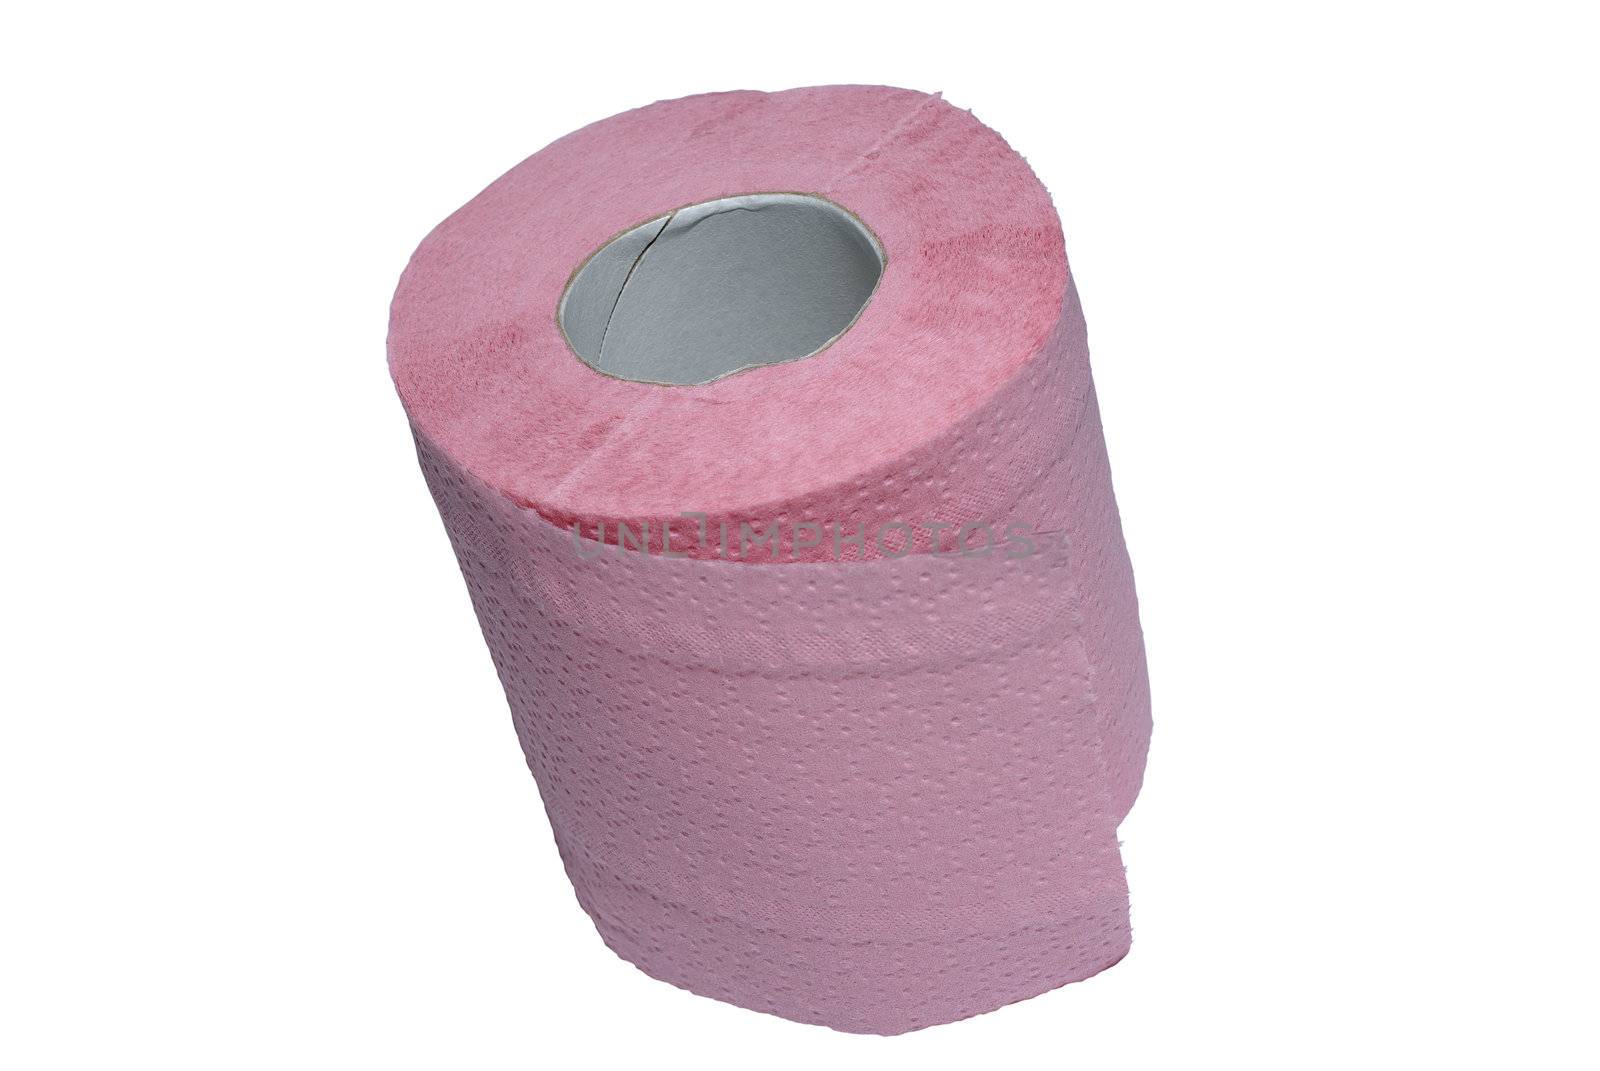 Rolled pink toilet paper isolated on white background. Clipping path.